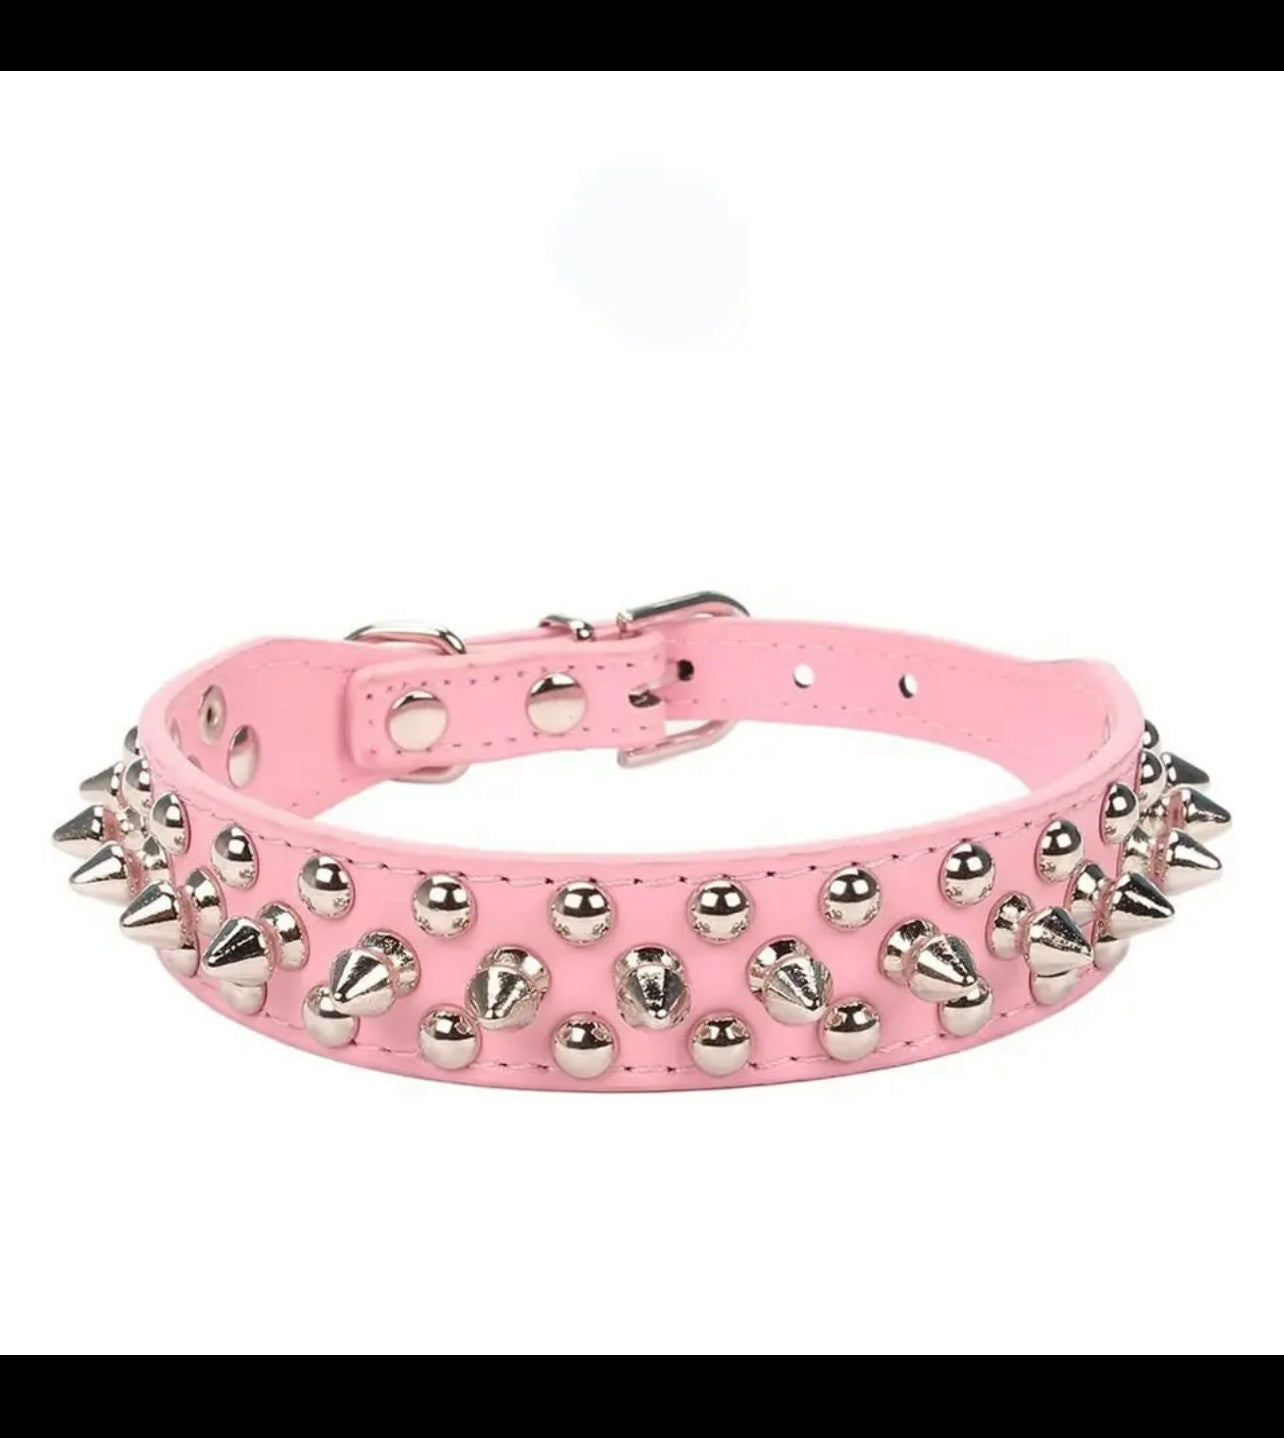 Puppy spiked leather collar